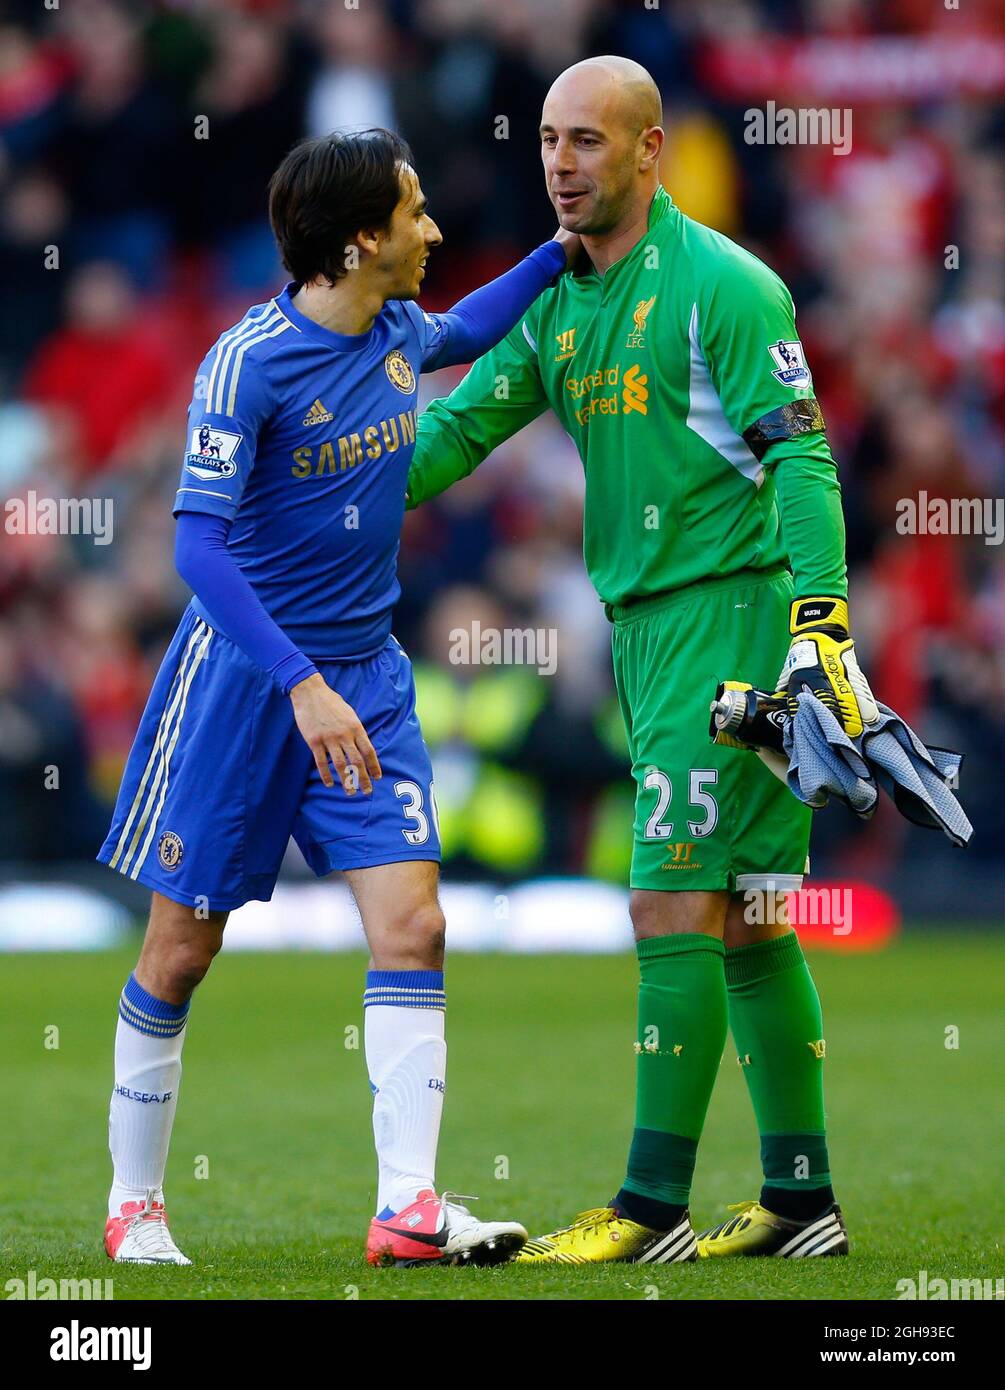 Pepe Reina of Liverpool and Yossi Benayoun of Chelsea talk at full time during the Barclays Premier League match between Liverpool and Chelsea in Anfield Stadium on April 21, 2013. Stock Photo